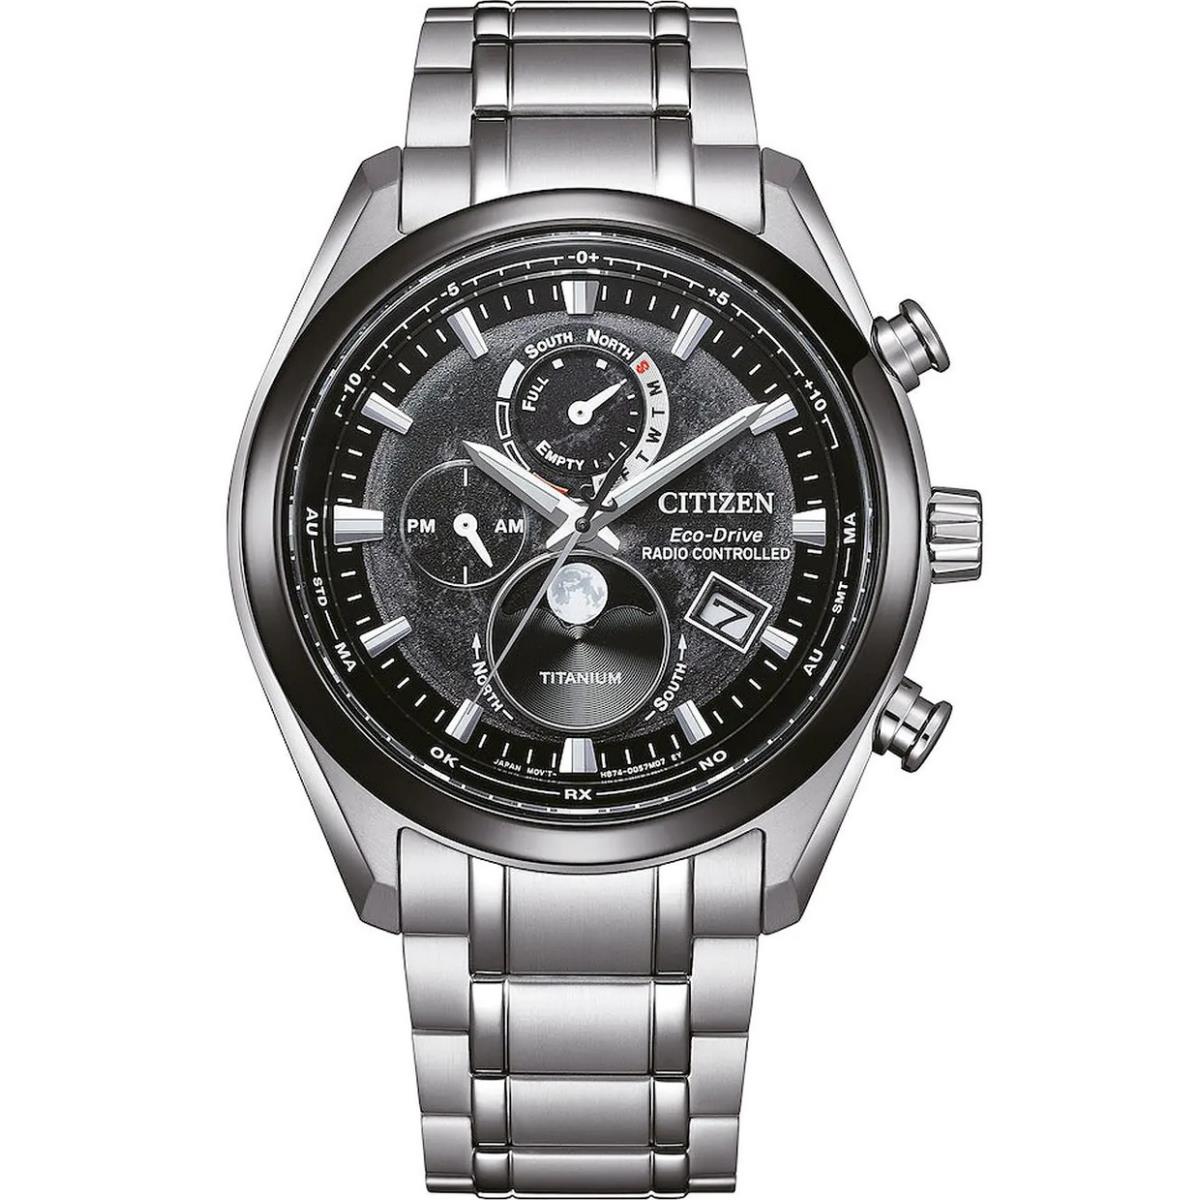 Citizen Titanium Sapphire Moonphase Radio Controlled Black Dial Watch BY1018-80E - Dial: Black, Band: Silver, Bezel: Black